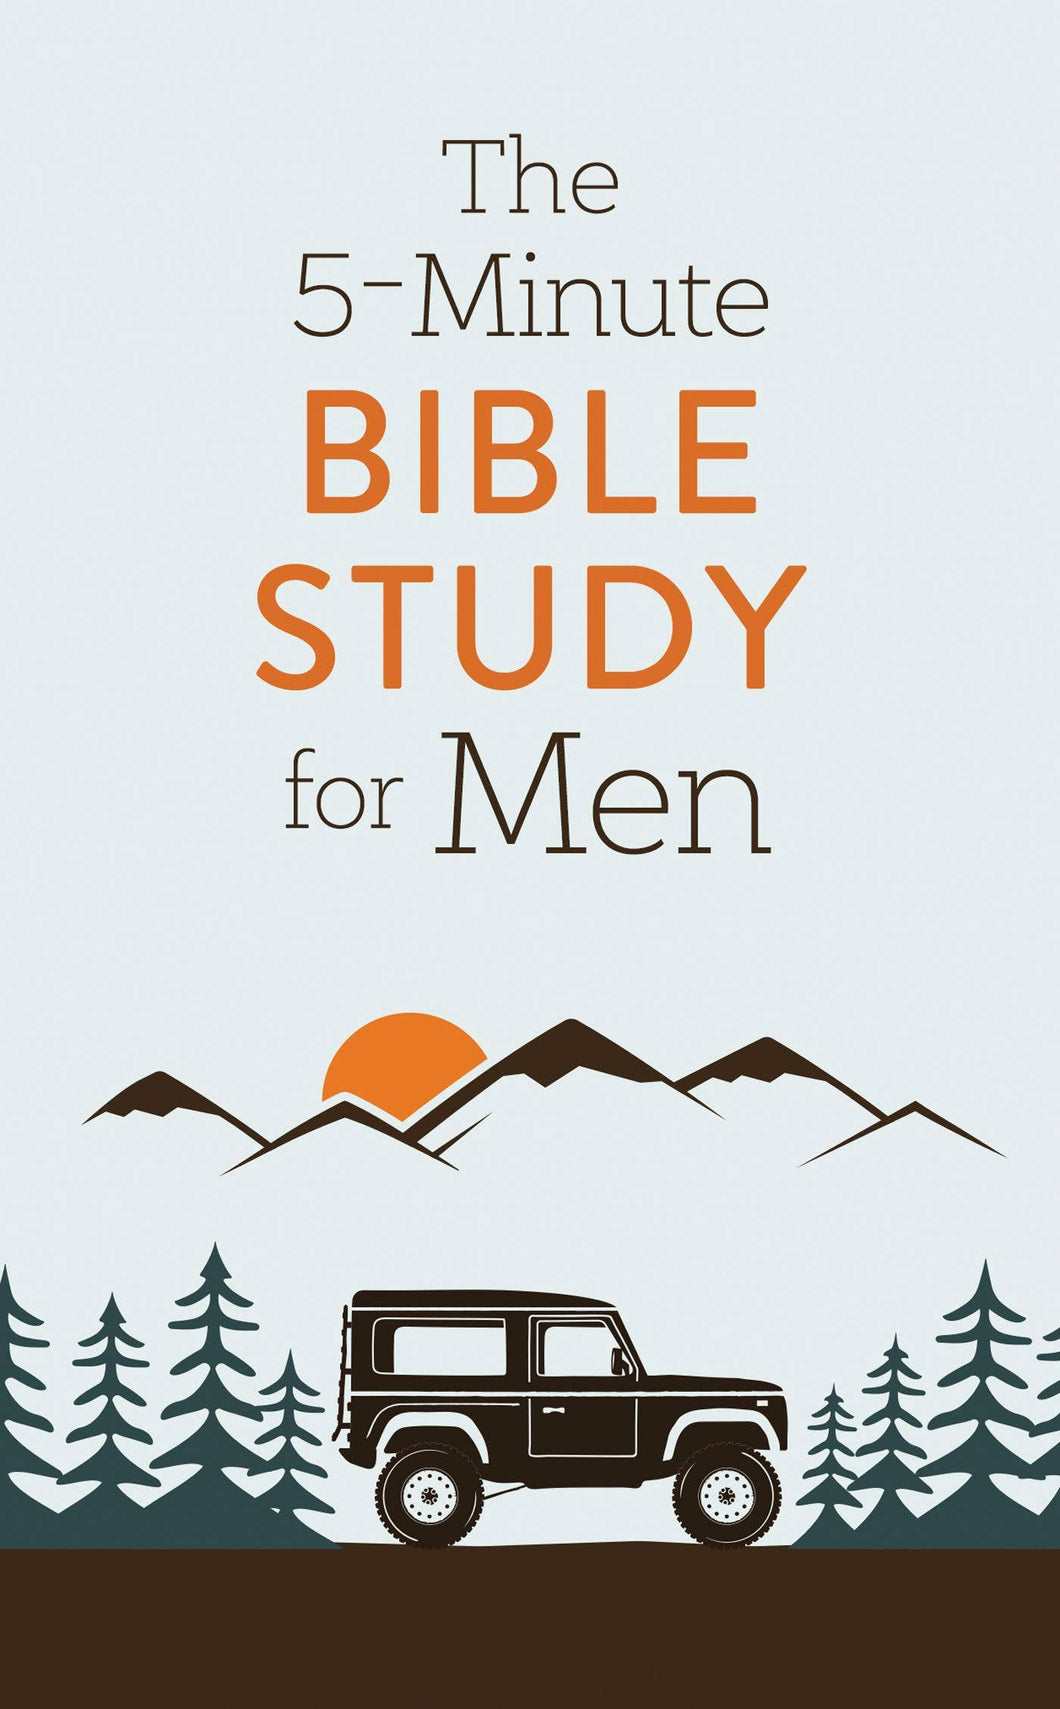 Book: The 5 Minute Bible Study for Men